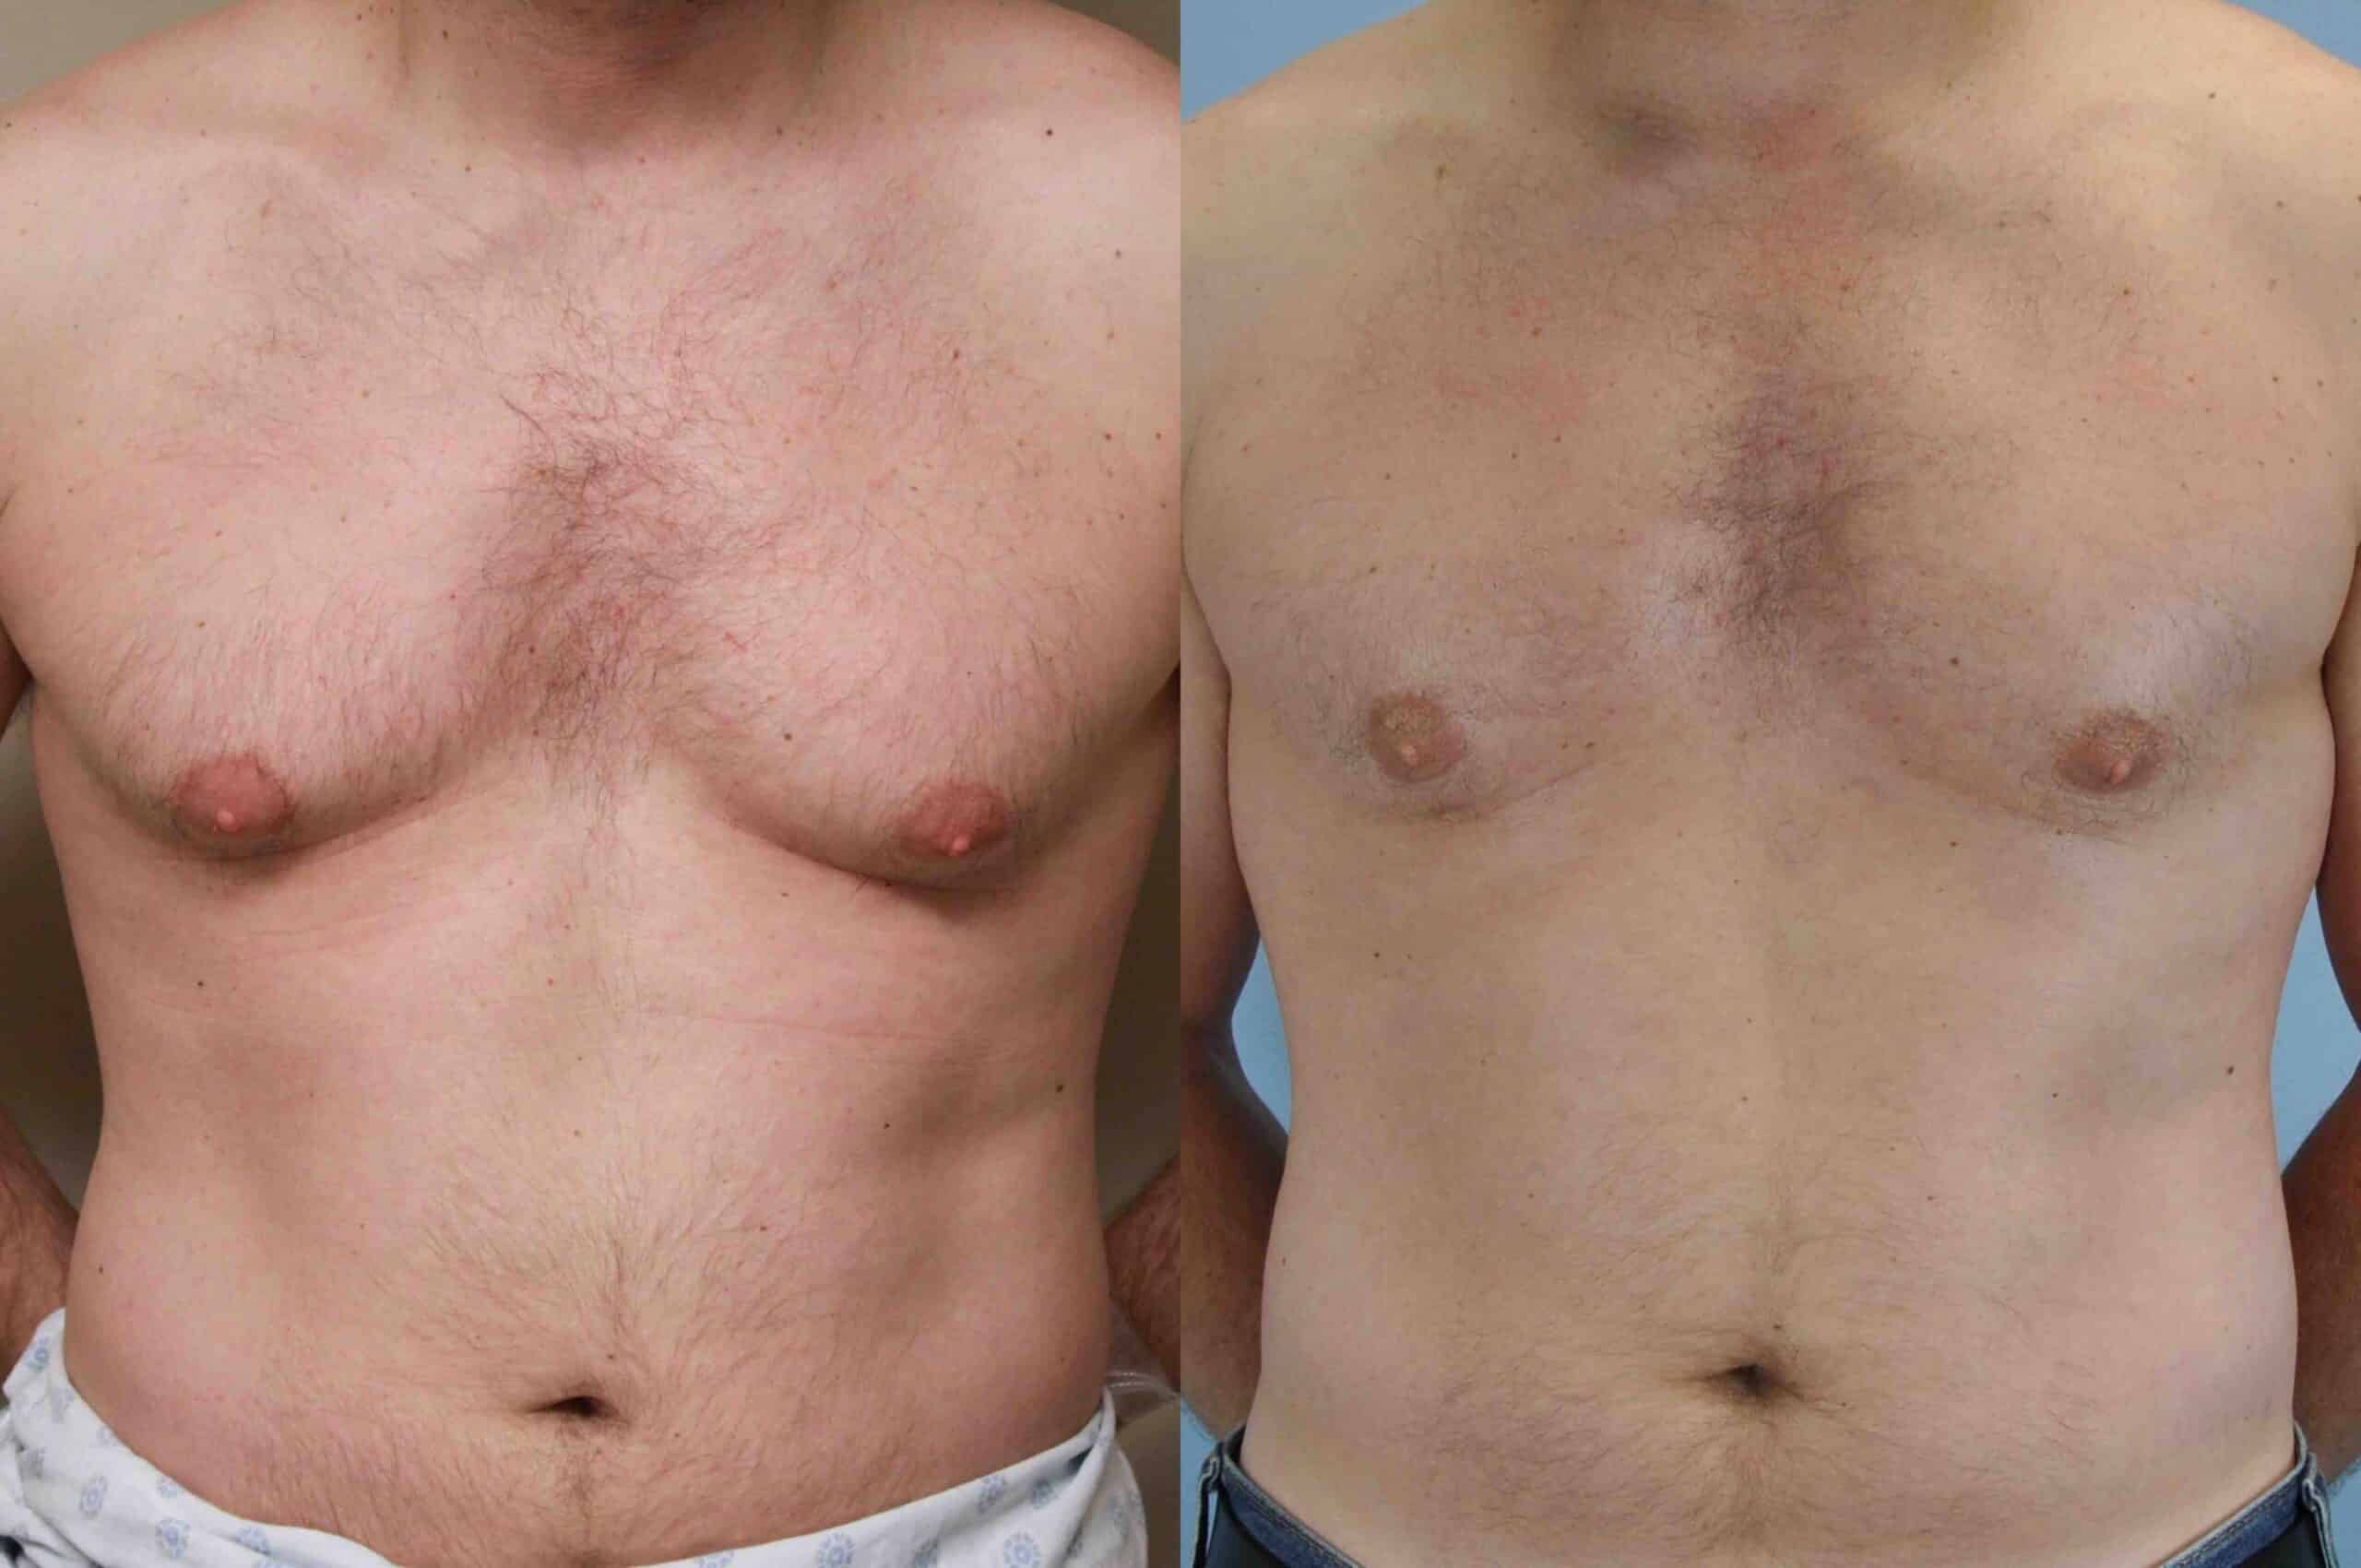 Before and after, patient 3 mo post op from Gynecomastia and VASER chest procedures performed by Dr. Paul Vanek